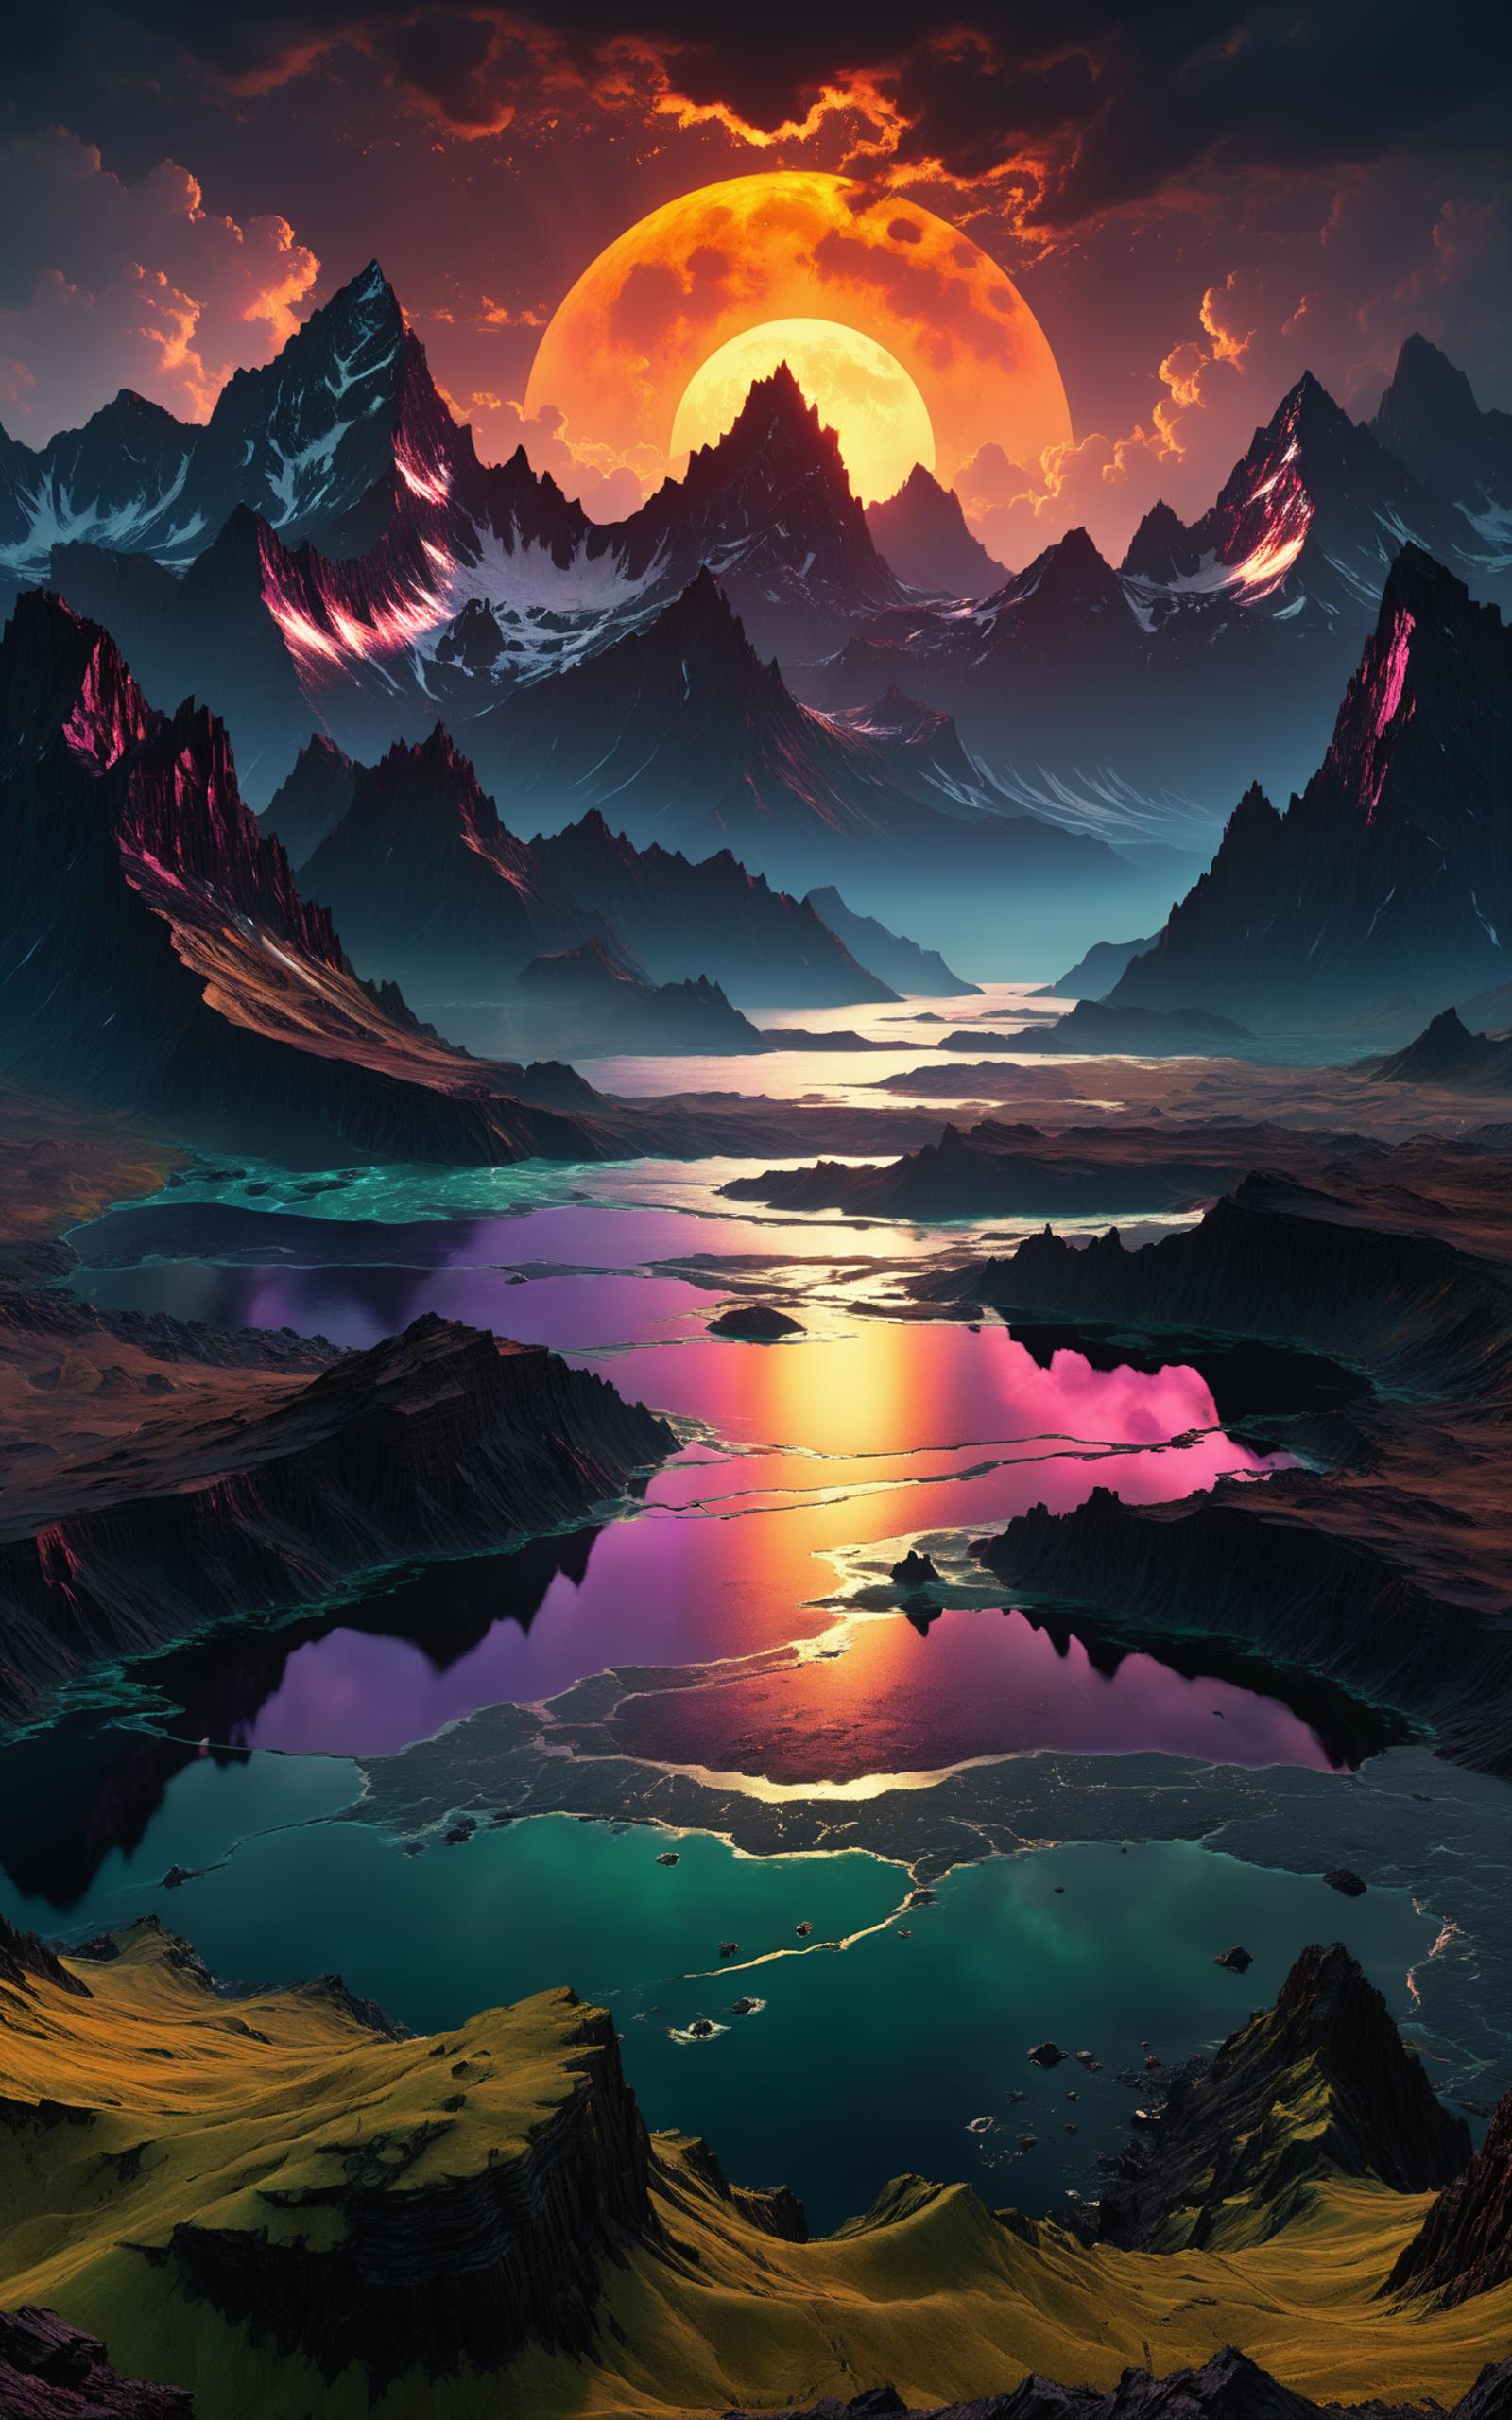 Artistic Mountain Landscape with a Pink Sky and Rainbow Reflections in the Lake